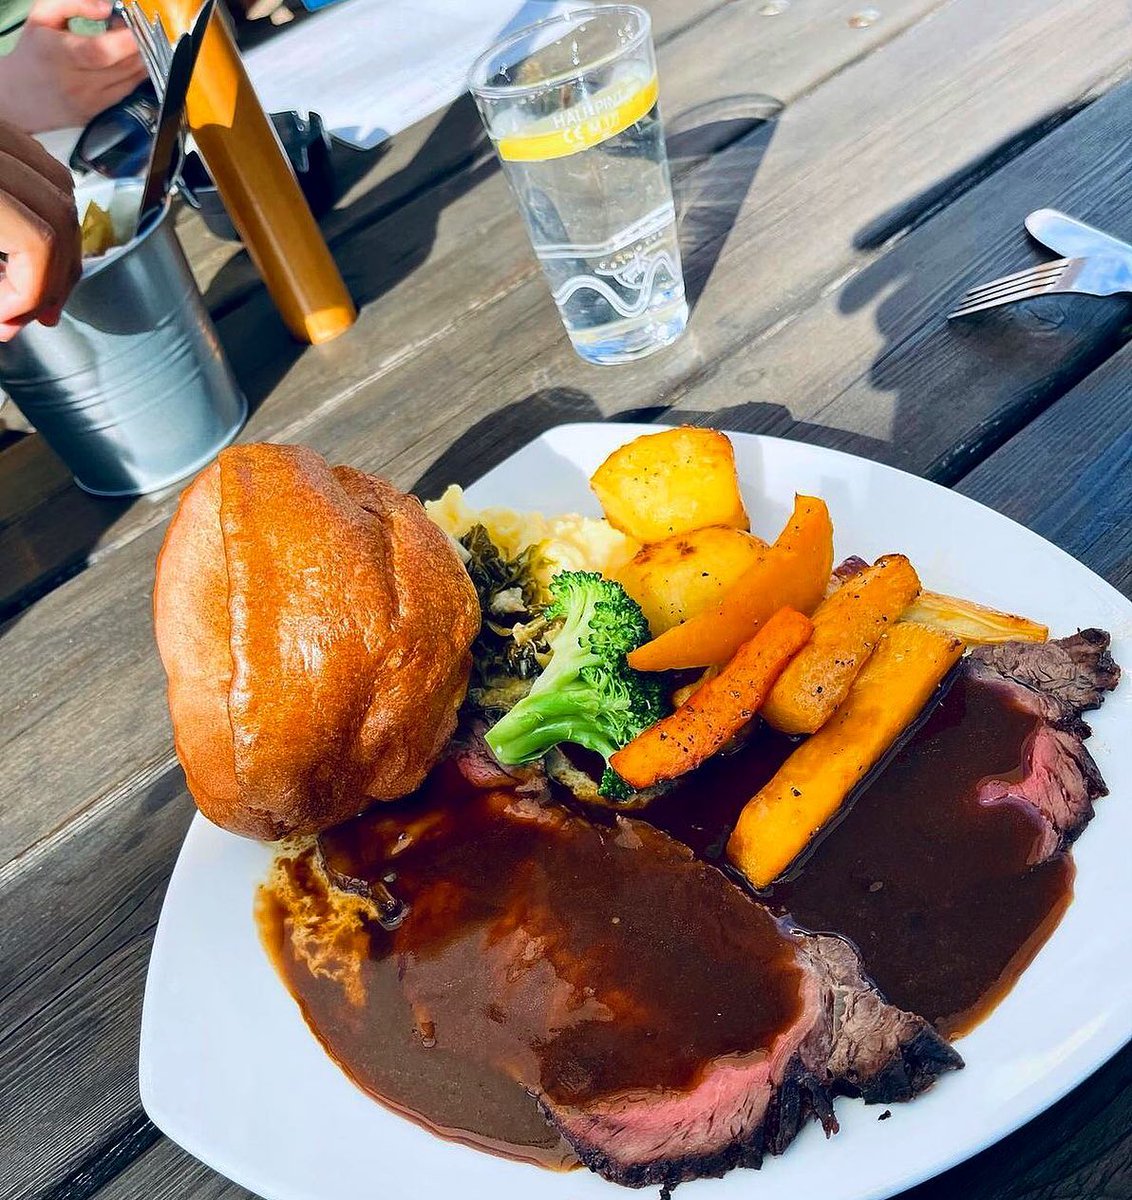 😎 Sunday Lunch, outdoors, in the beer garden or terrace. What better way to relax on a sunny Sunday afternoon. ☀️

#sundaylunch #whitehorse #harrow #fullerspub #beergarden